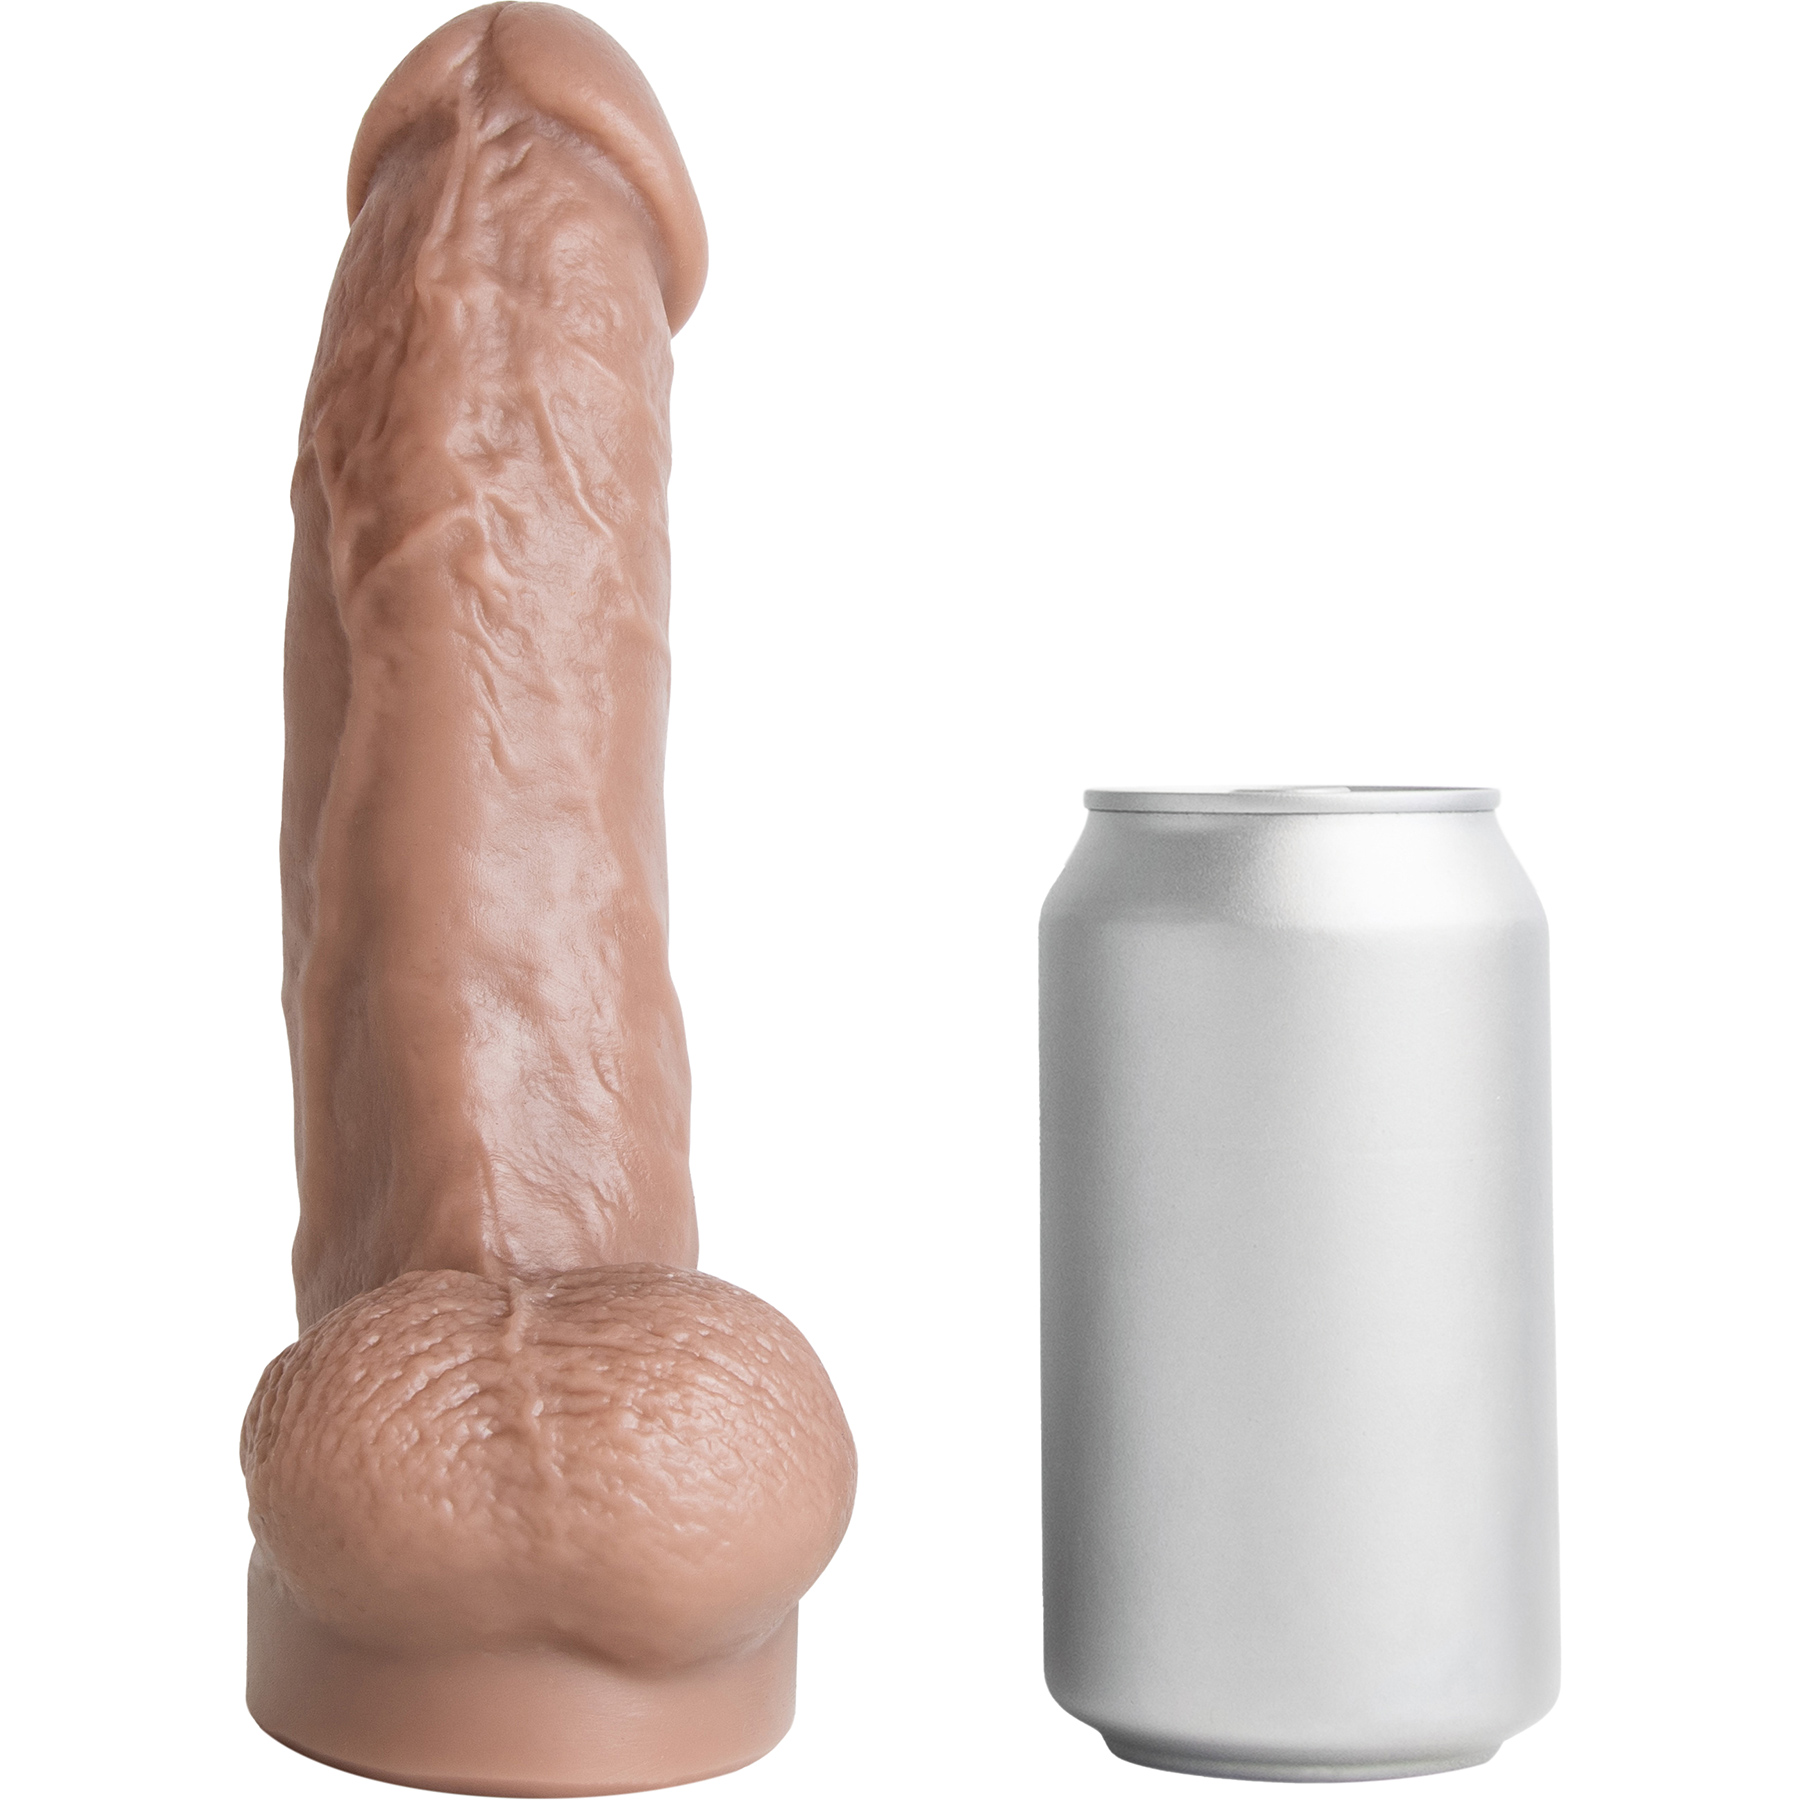 Hankey's Toys Cyrus King Original 8.5 Inch Silicone Cock With Balls